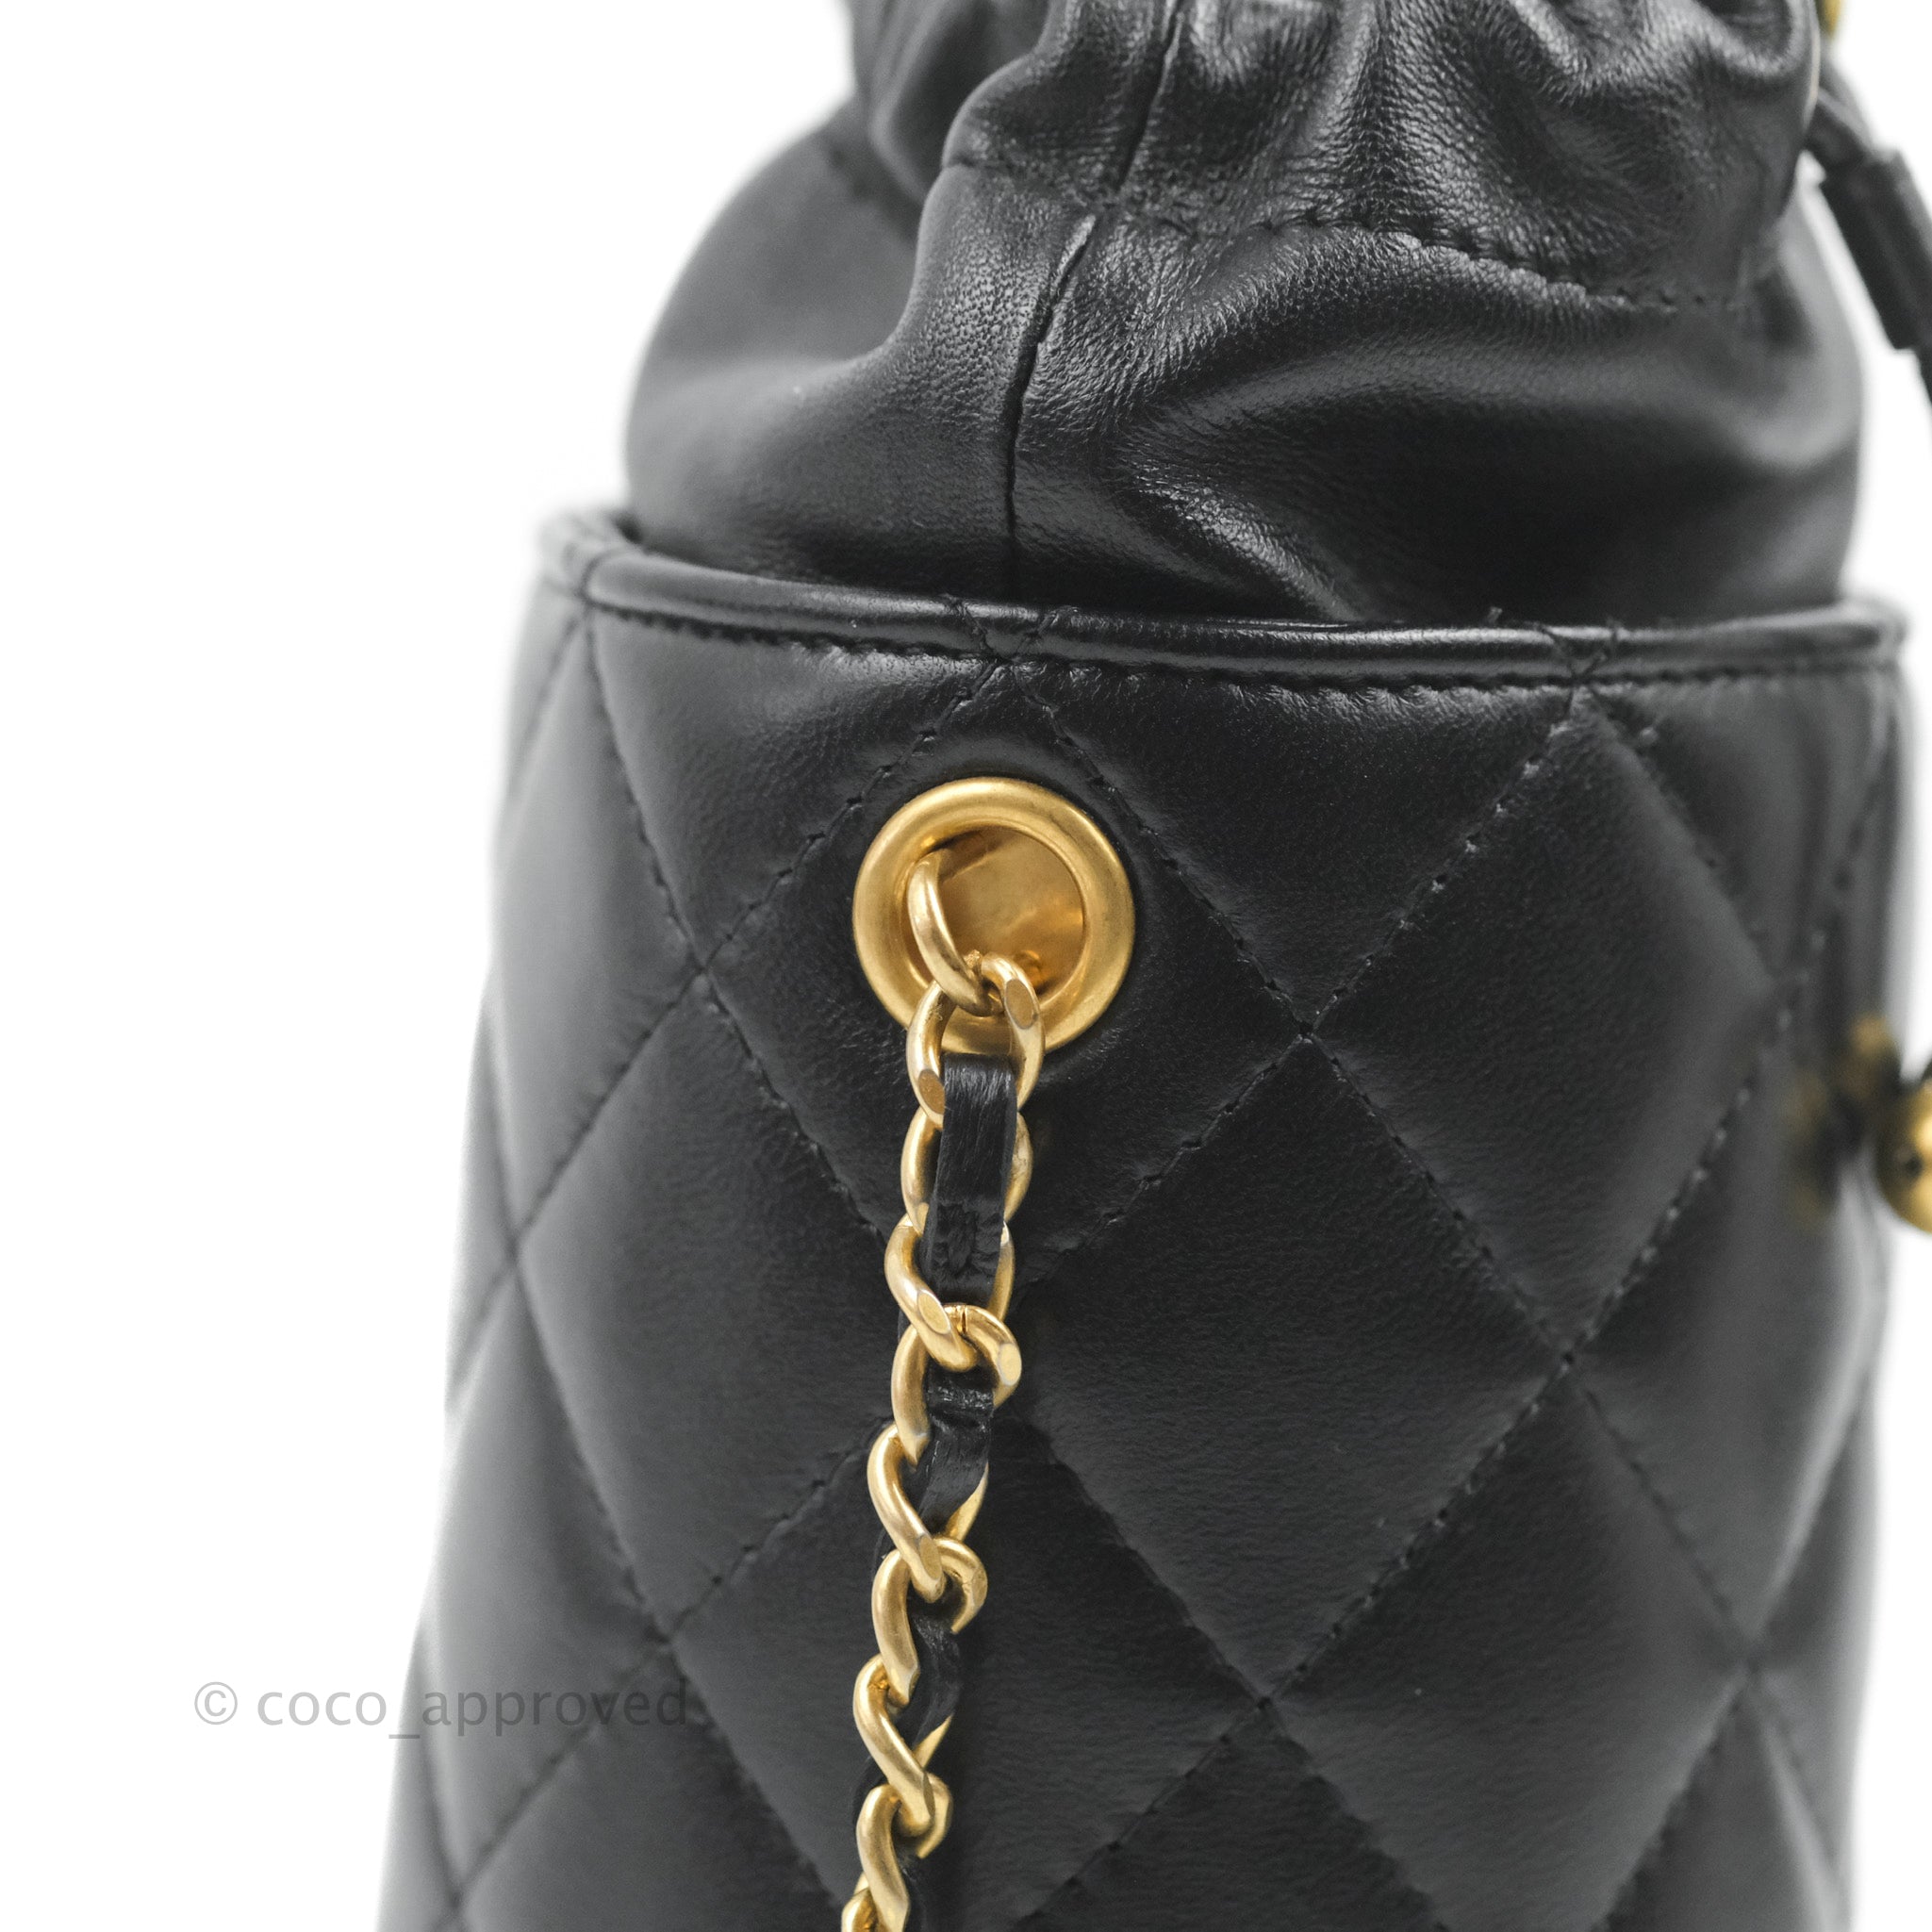 Chanel Drawstring Bucket Quilted Lambskin Leather Bag